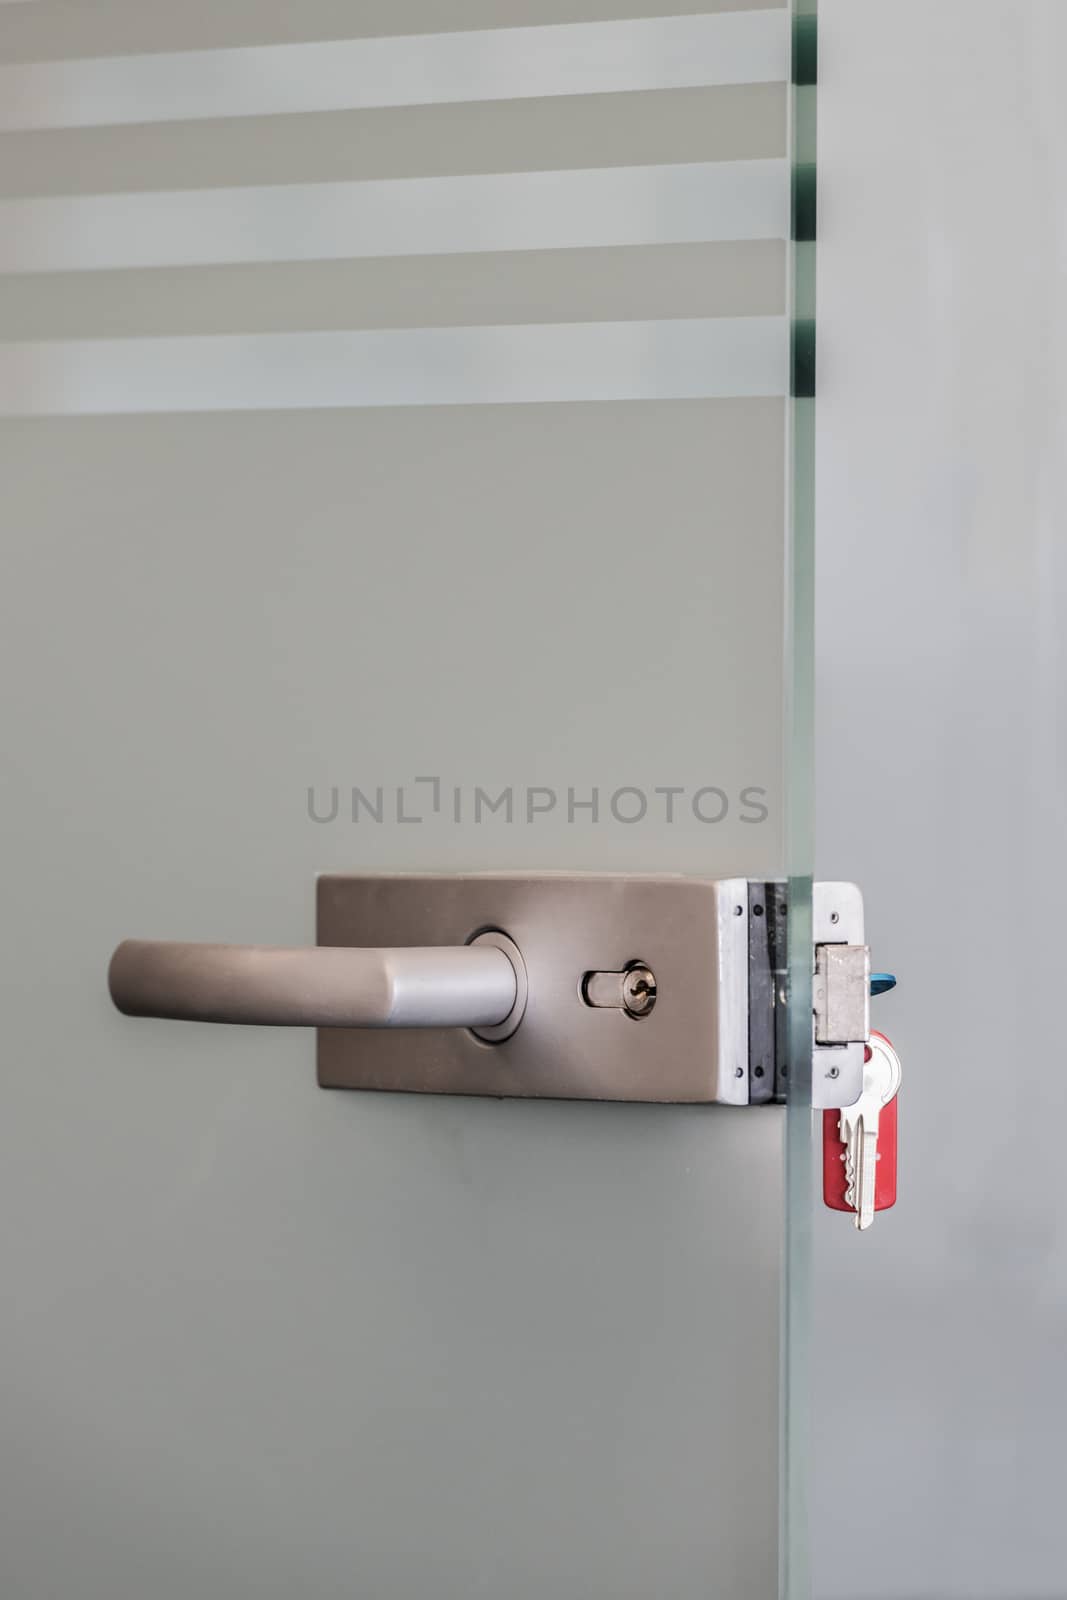 Modern glass door with metal alloy handles and key chain in lock, home or office security concept by asafaric